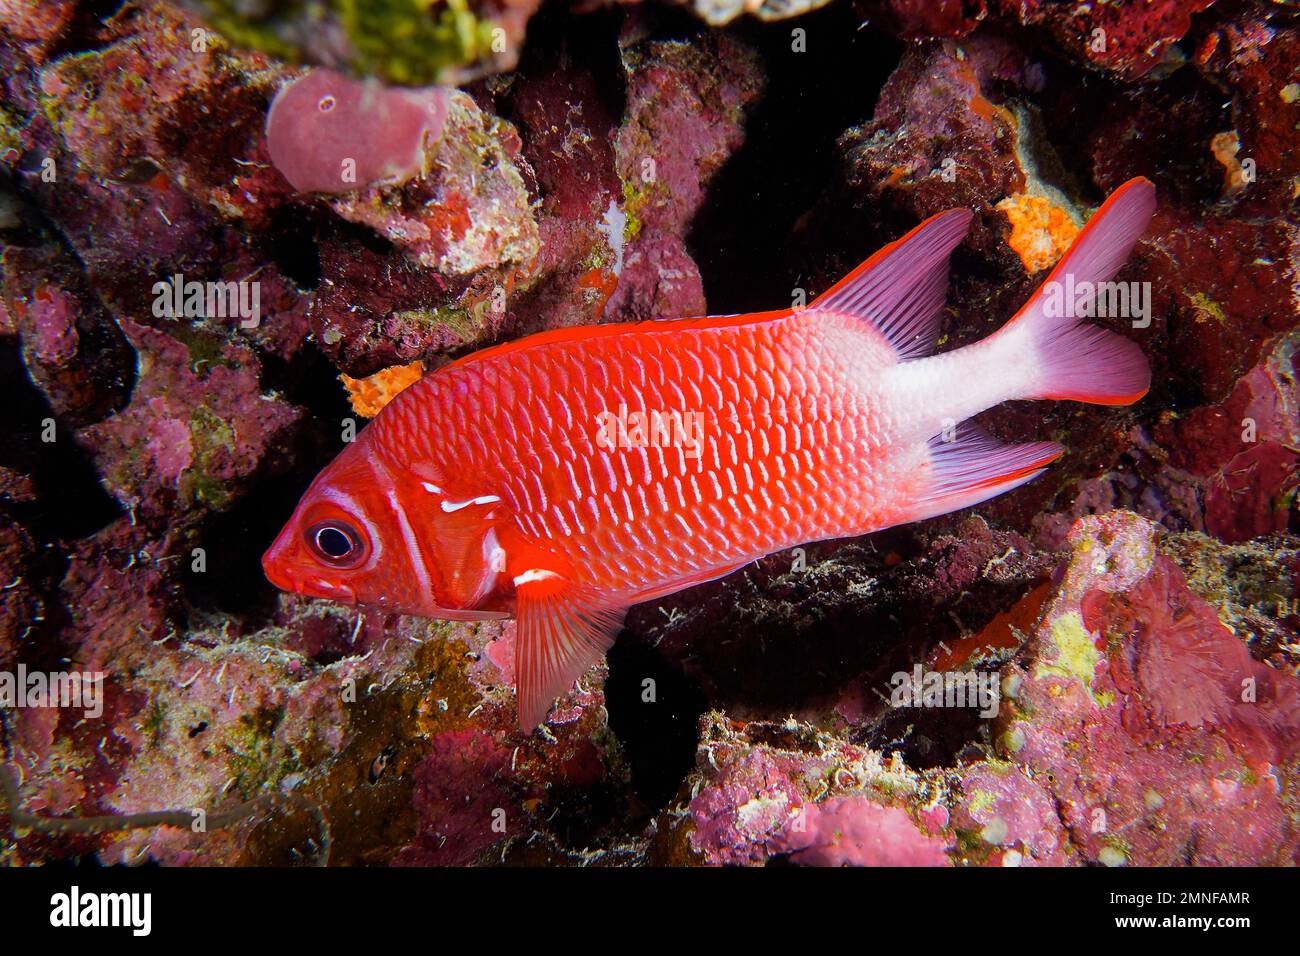 Red silver spotted hussar (Sargocentron caudimaculatum) in the red reef. Dive site Small Brother, Brother Islands, Egypt, Red Sea Stock Photo